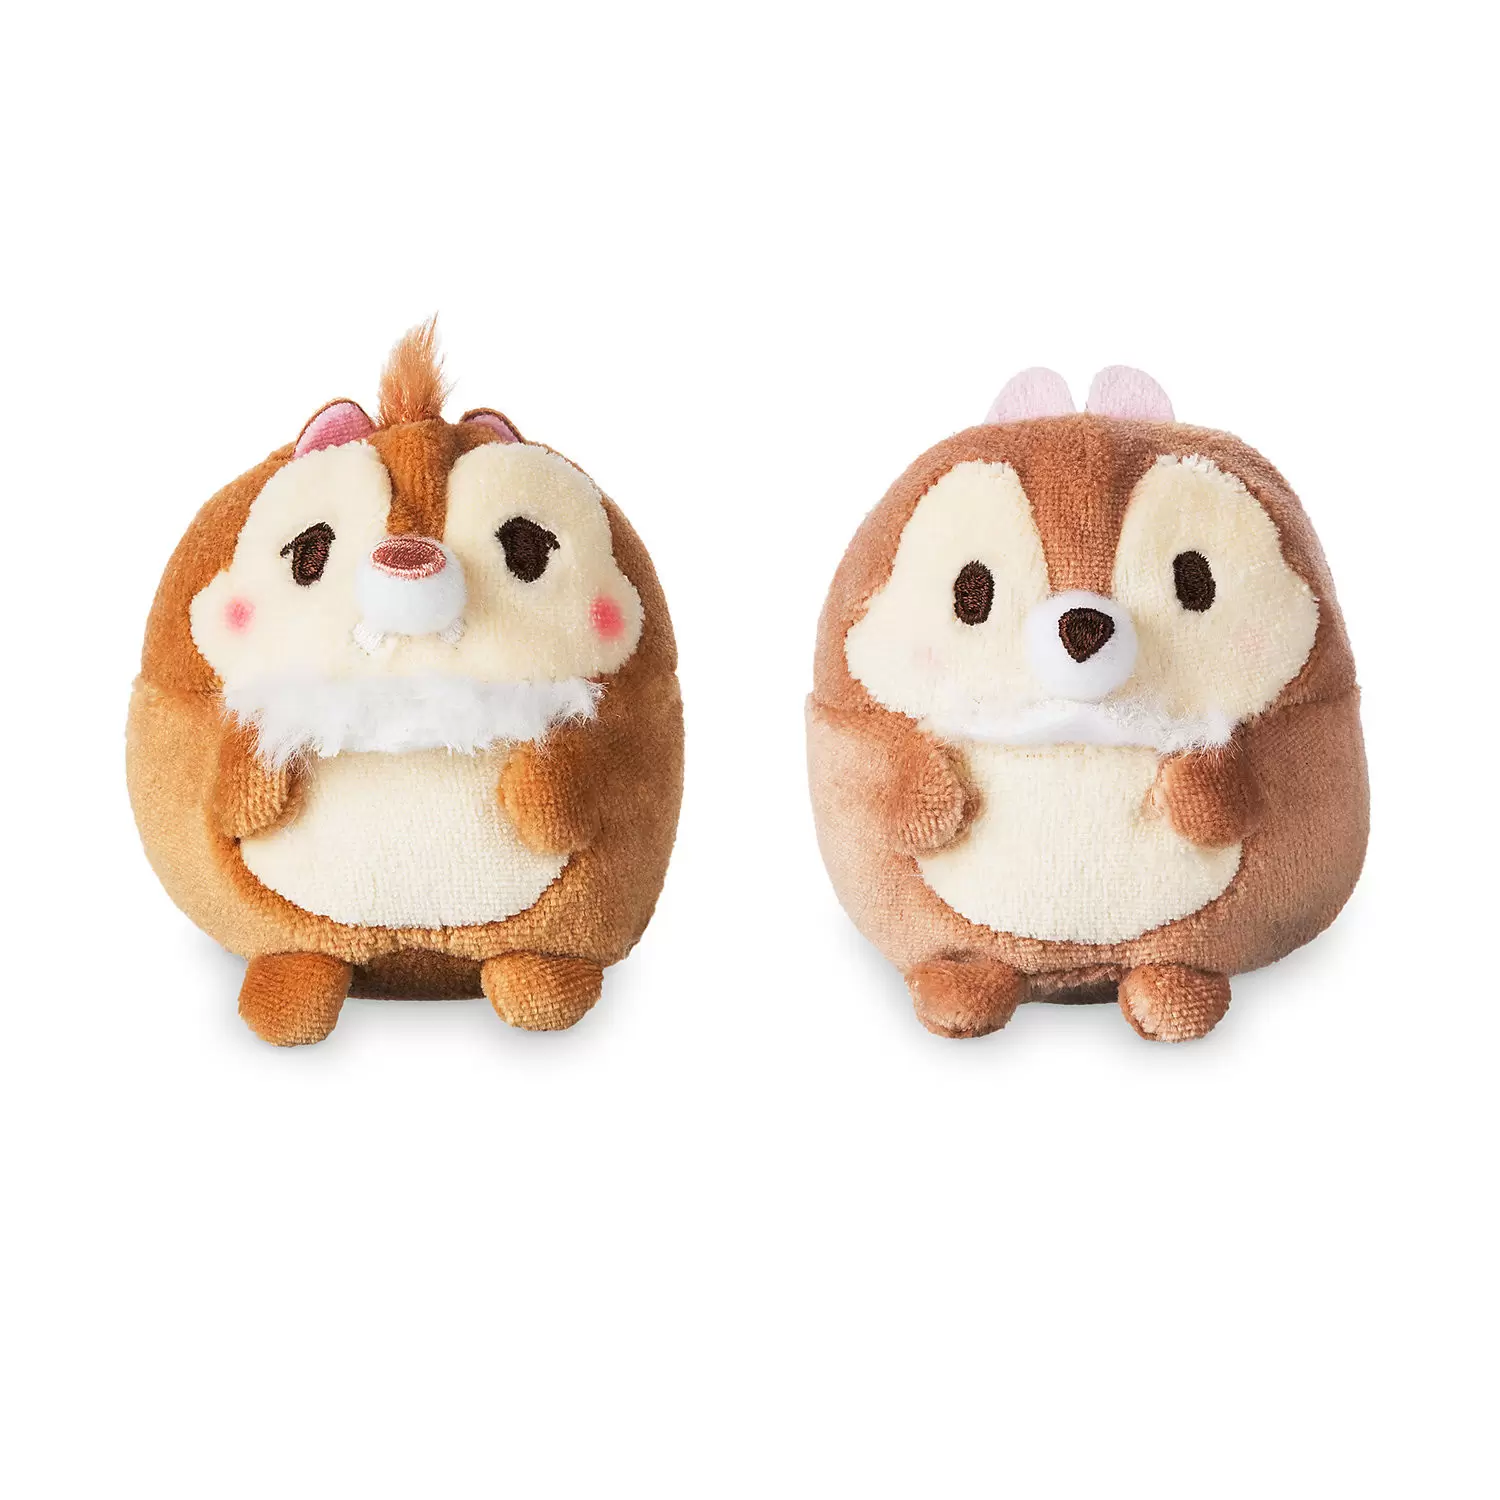 Ufufy Plush - Chip and Dale